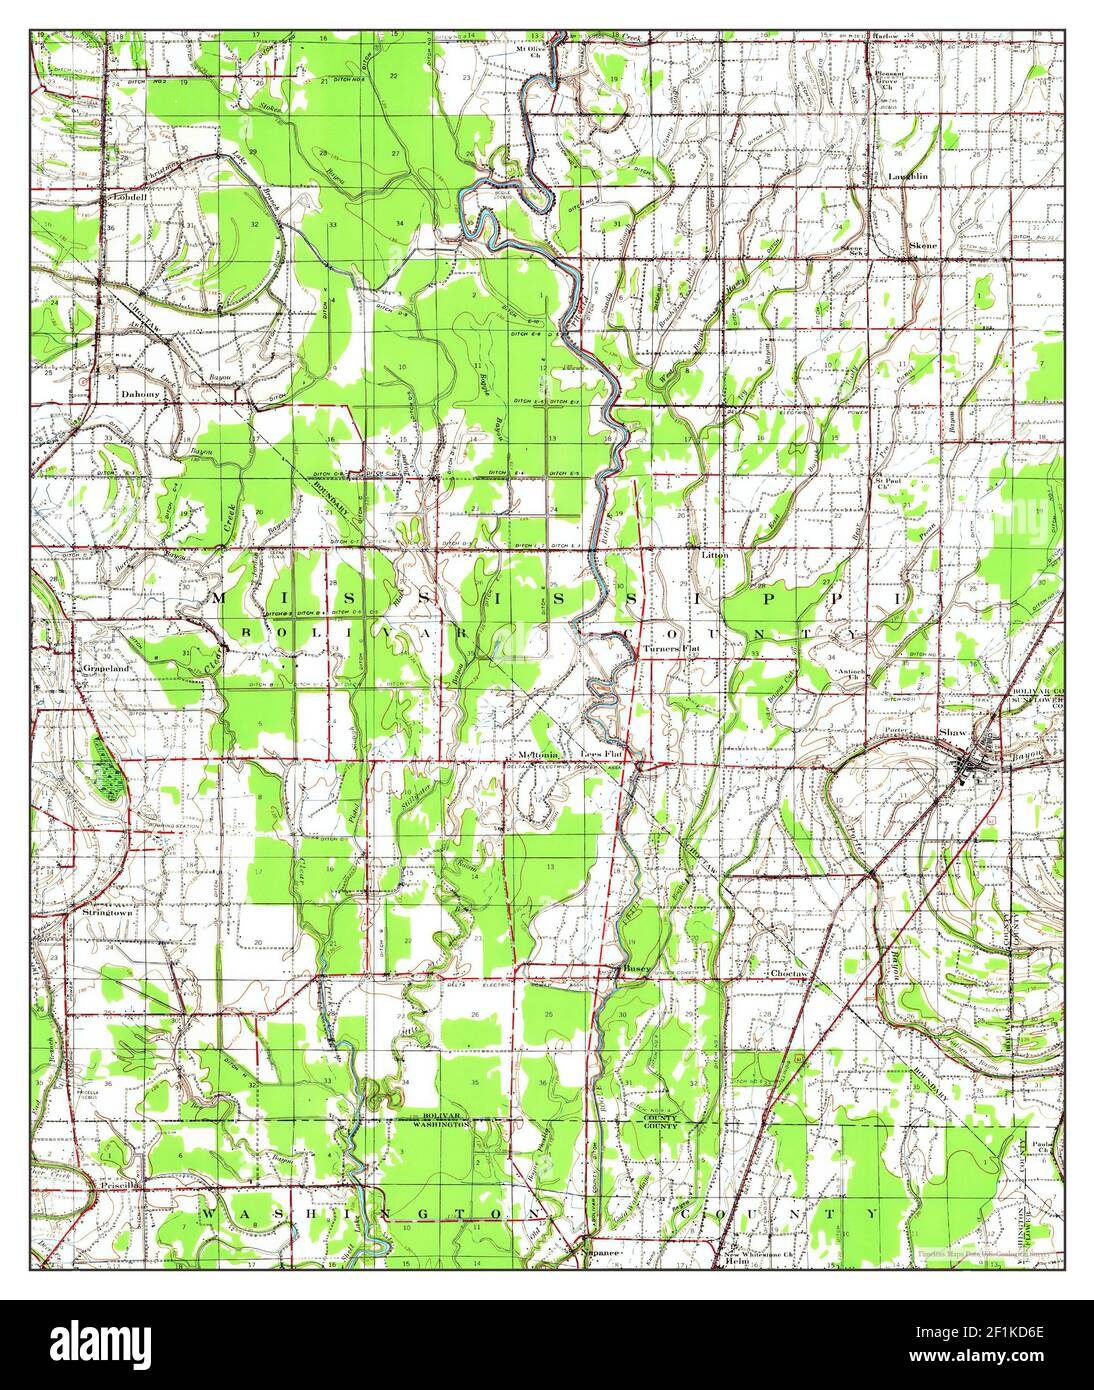 Choctaw, Mississippi, map 1939, 1:62500, United States of America by Timeless Maps, data U.S. Geological Survey Stock Photo